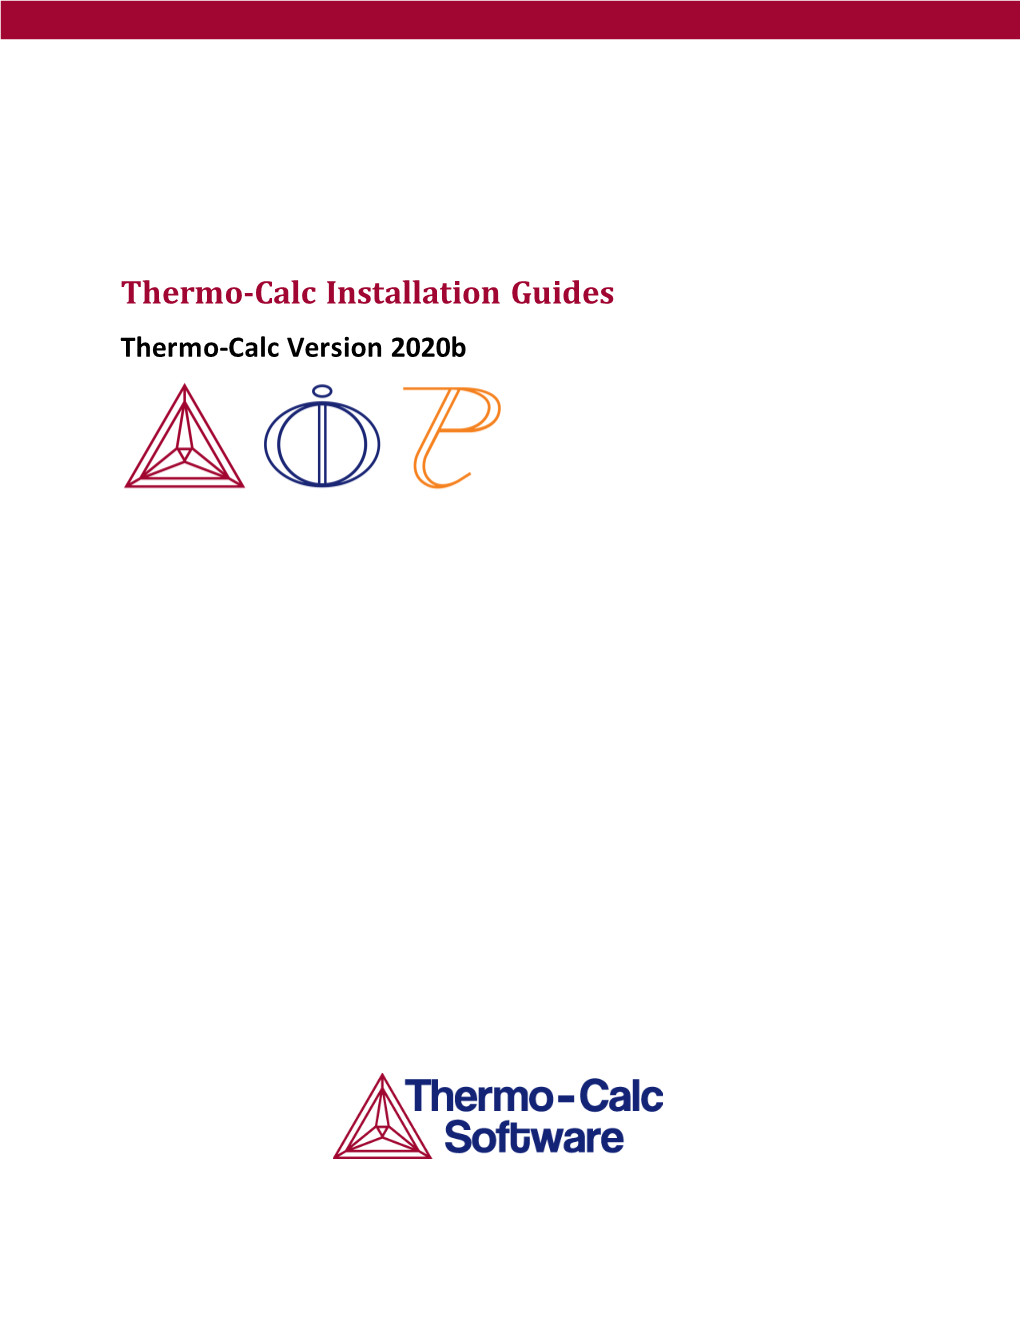 Thermo-Calc Installation Guides Thermo-Calc Version 2020B Copyright 2020 Thermo-Calc Software AB